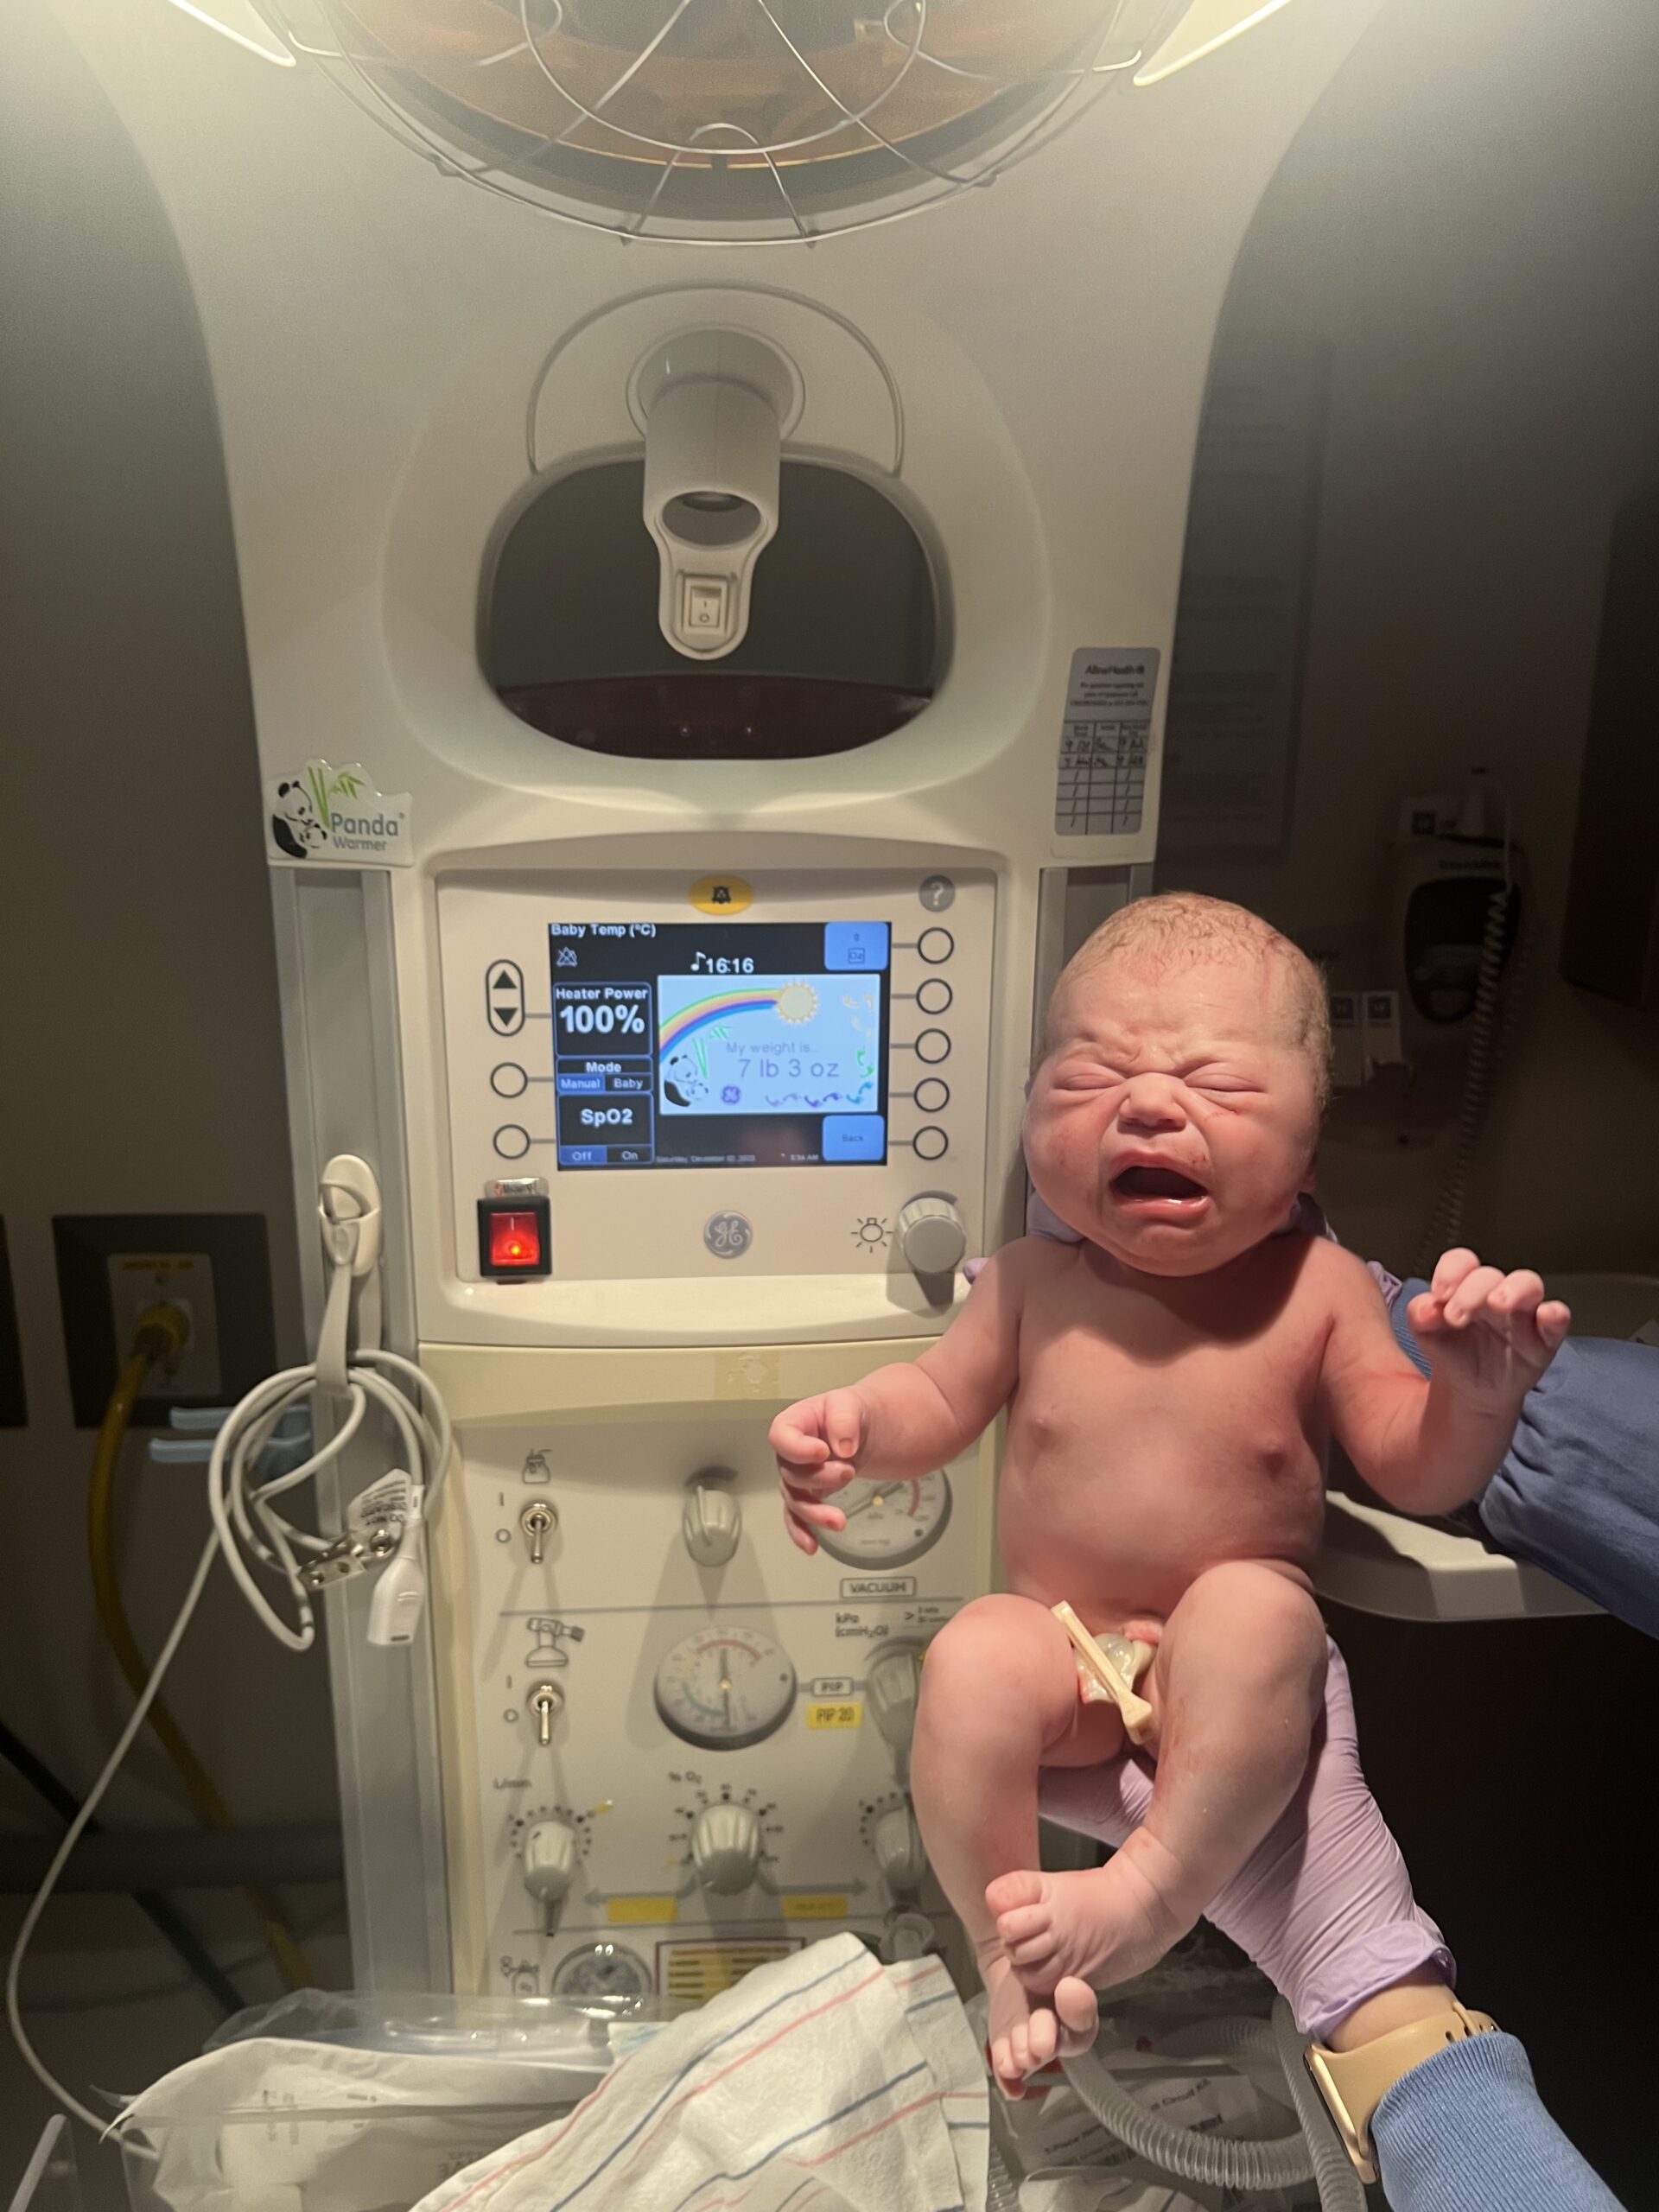 Solange minutes after being delivered under the heat lamps, she's crying and confused and the nurse at Mother Baby center is holding her up to the machine that says her birth weight, 7 lbs 3 oz.